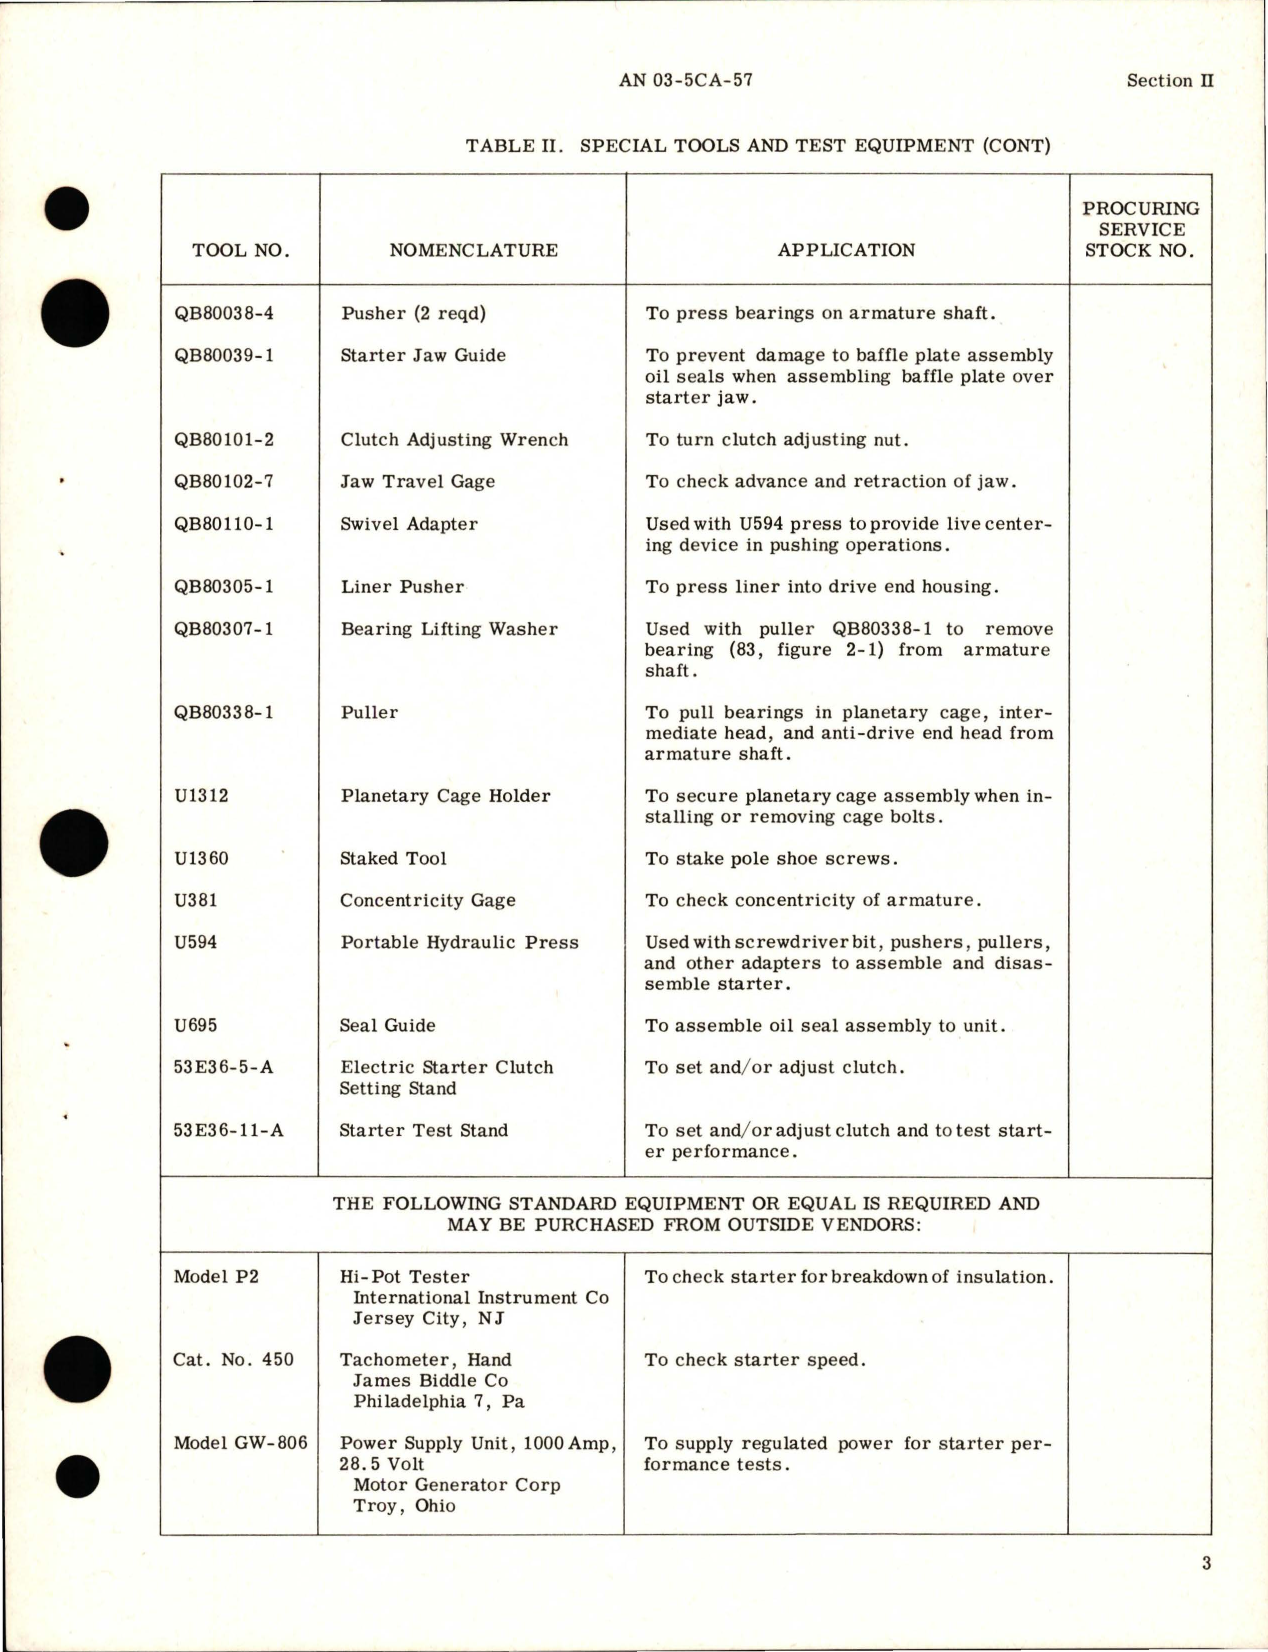 Sample page 7 from AirCorps Library document: Overhaul Instructions for Direct Cranking Electric Starters 